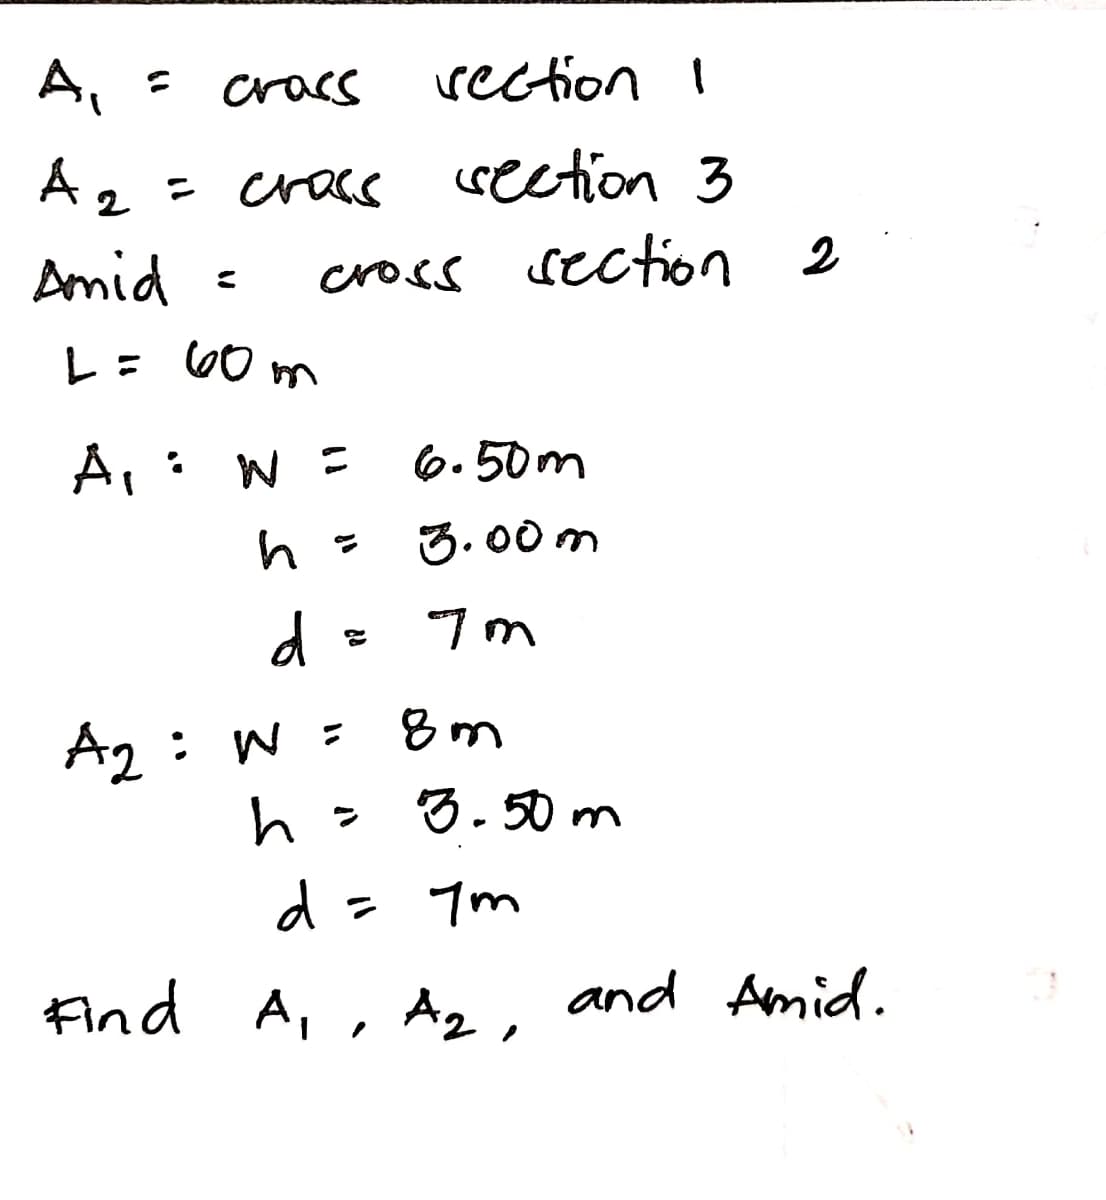 A, =
crass
rection I
A2 = cracs section 3
Amid
cross section
2
レ: OO m
6.50m
3.00 m
d
8m
A2: W =
3. 50 m
ン
d= 7m
Find
A, , A2, and Amid.
